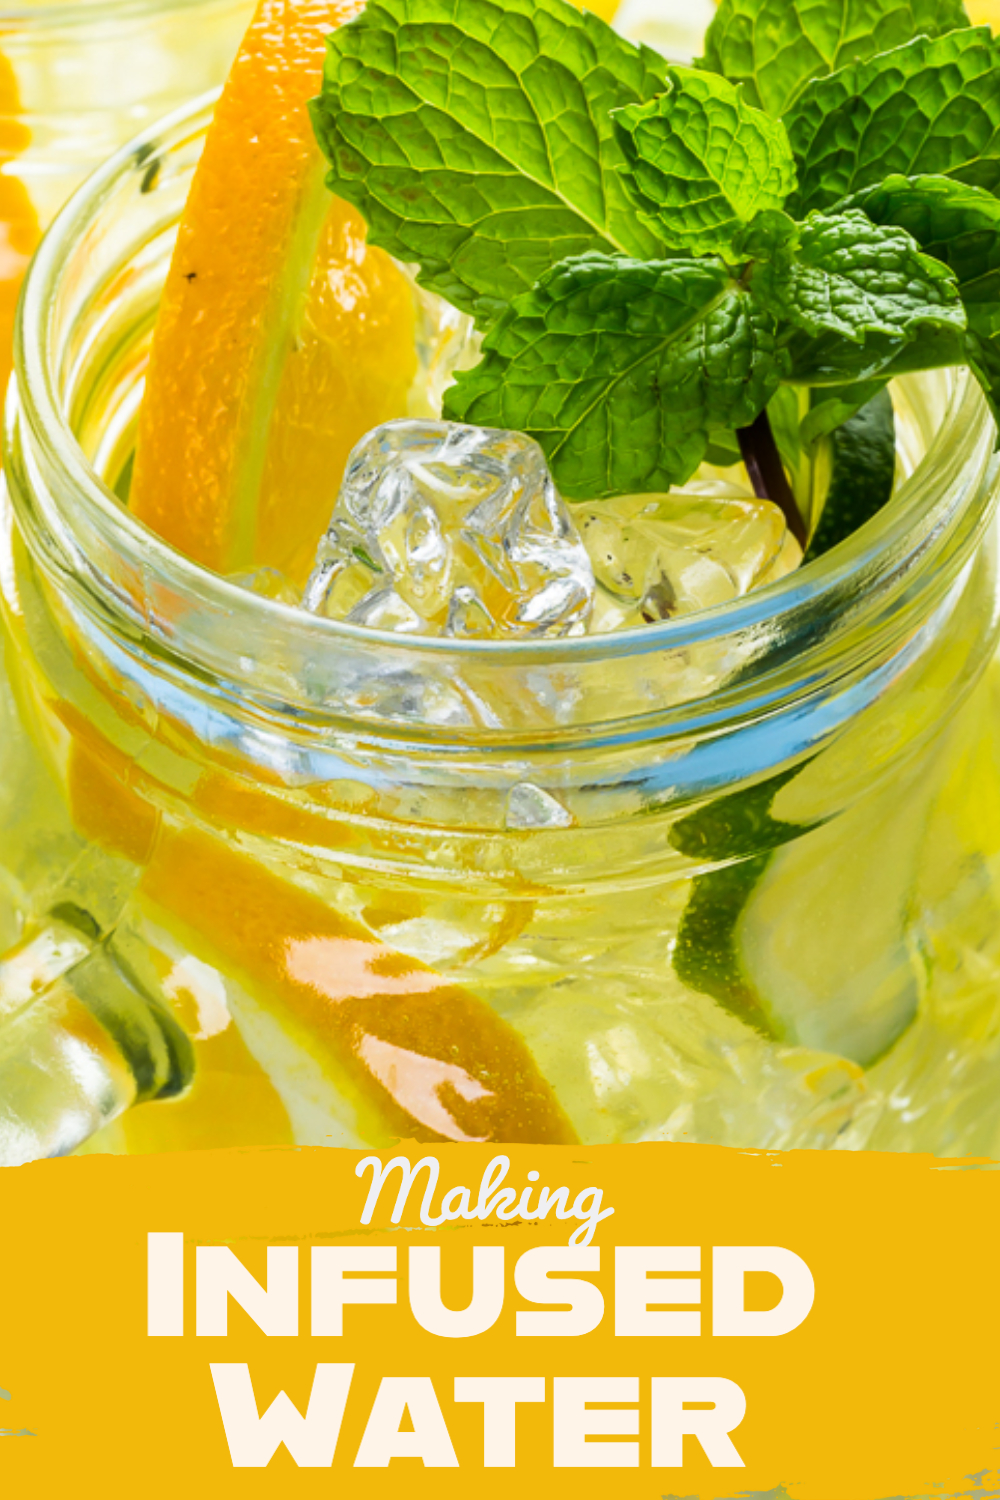 Making Infused Water